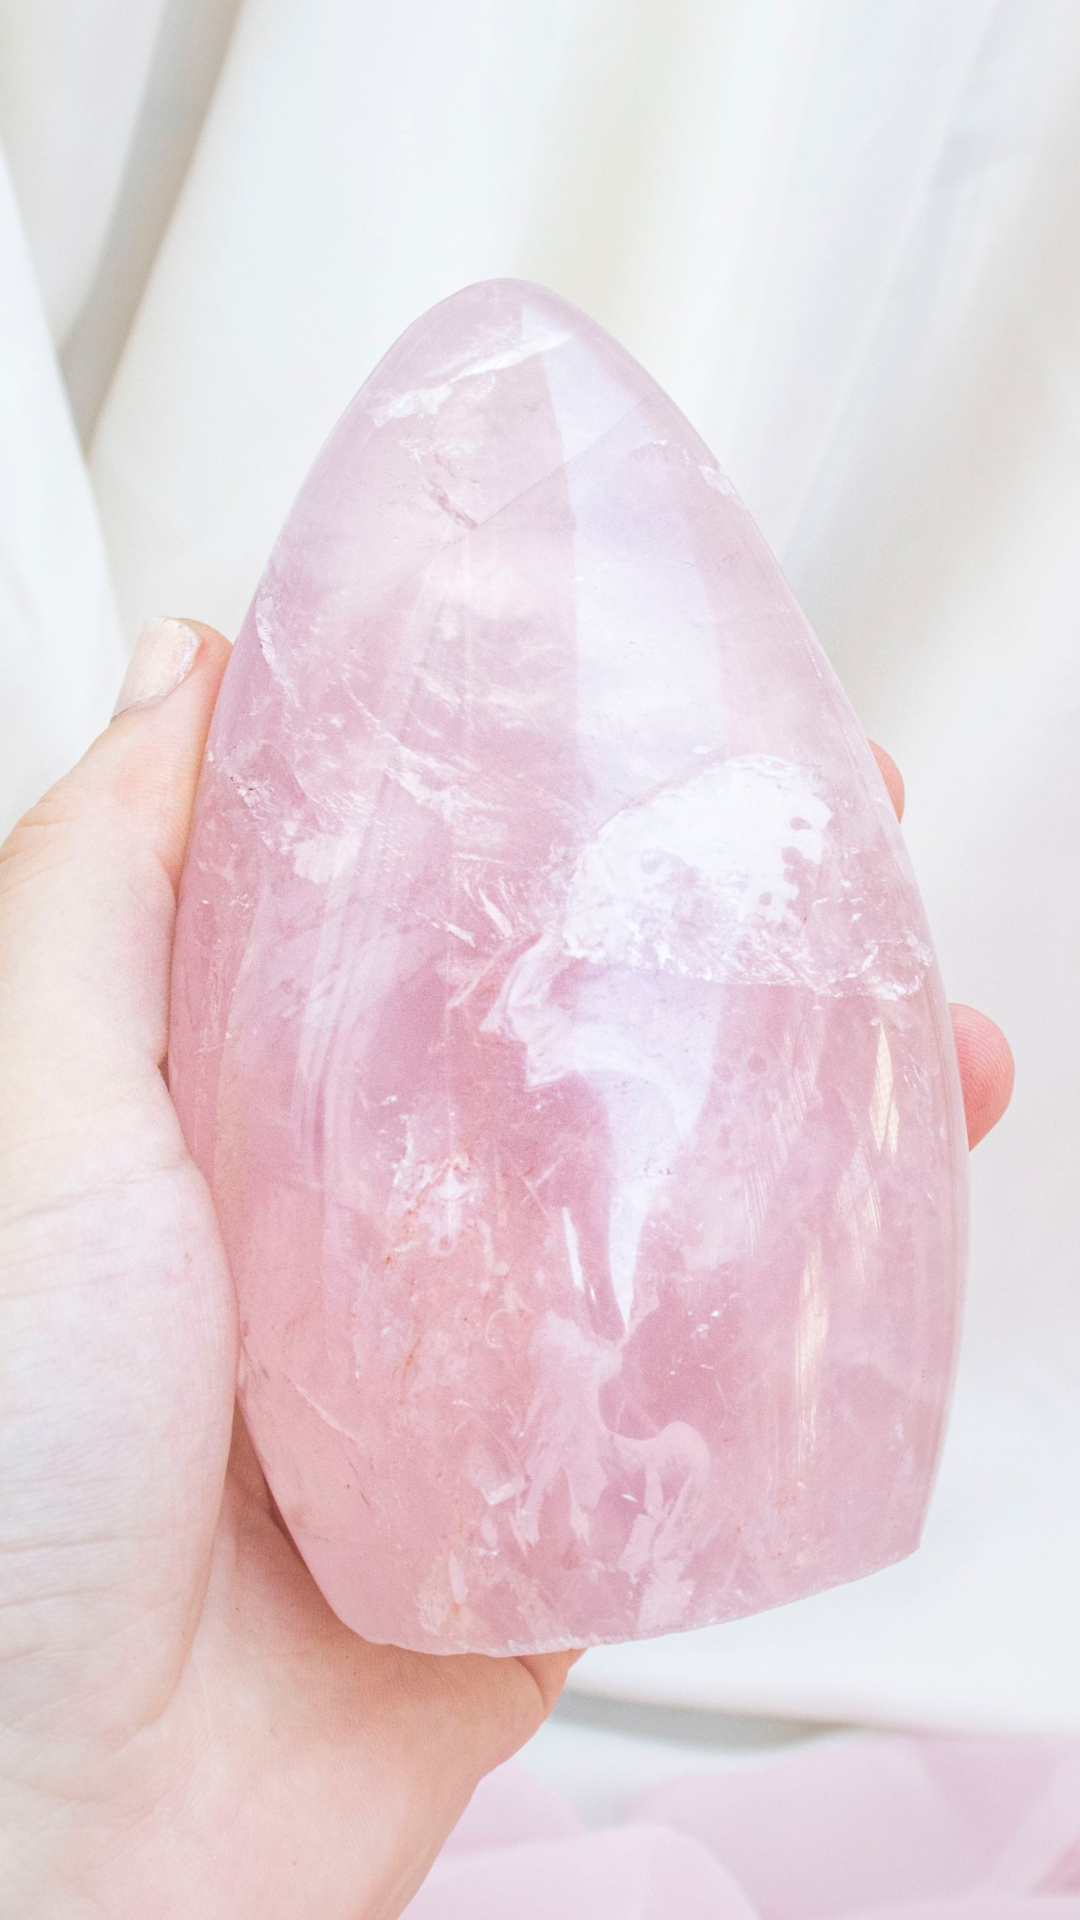 Astrological benefits of Rose Quartz that you should know